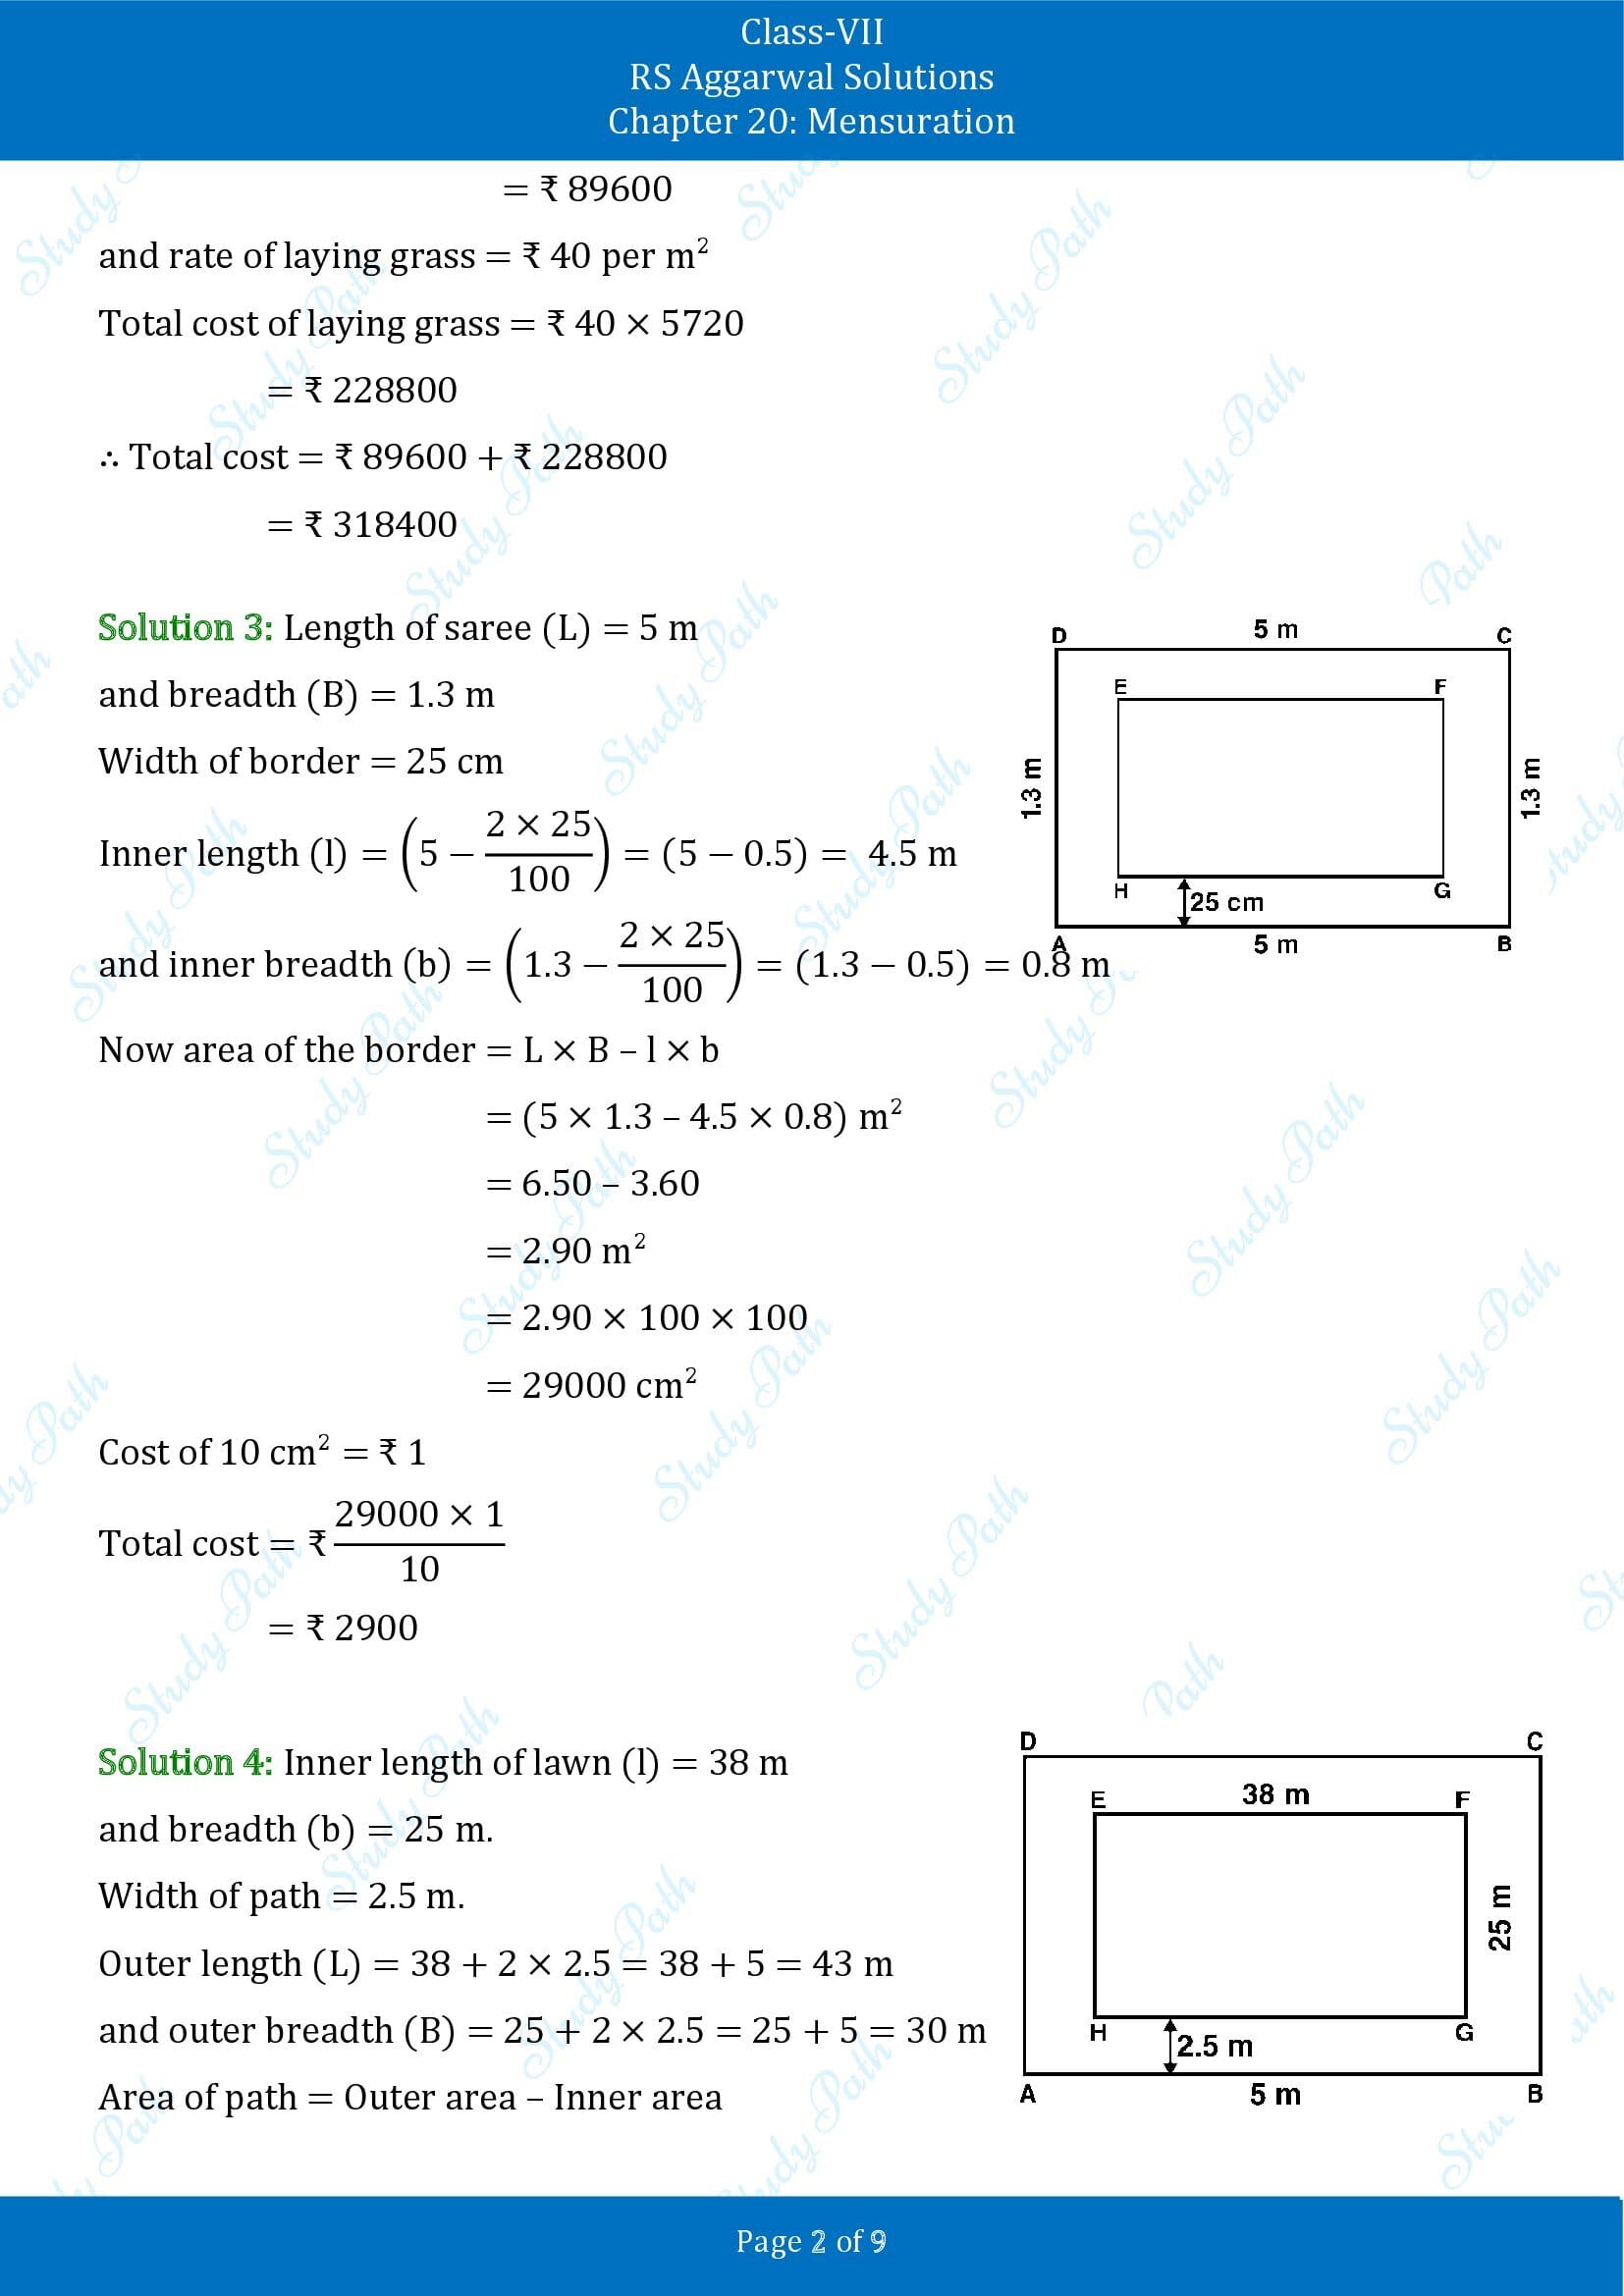 RS Aggarwal Solutions Class 7 Chapter 20 Mensuration Exercise 20B 00002